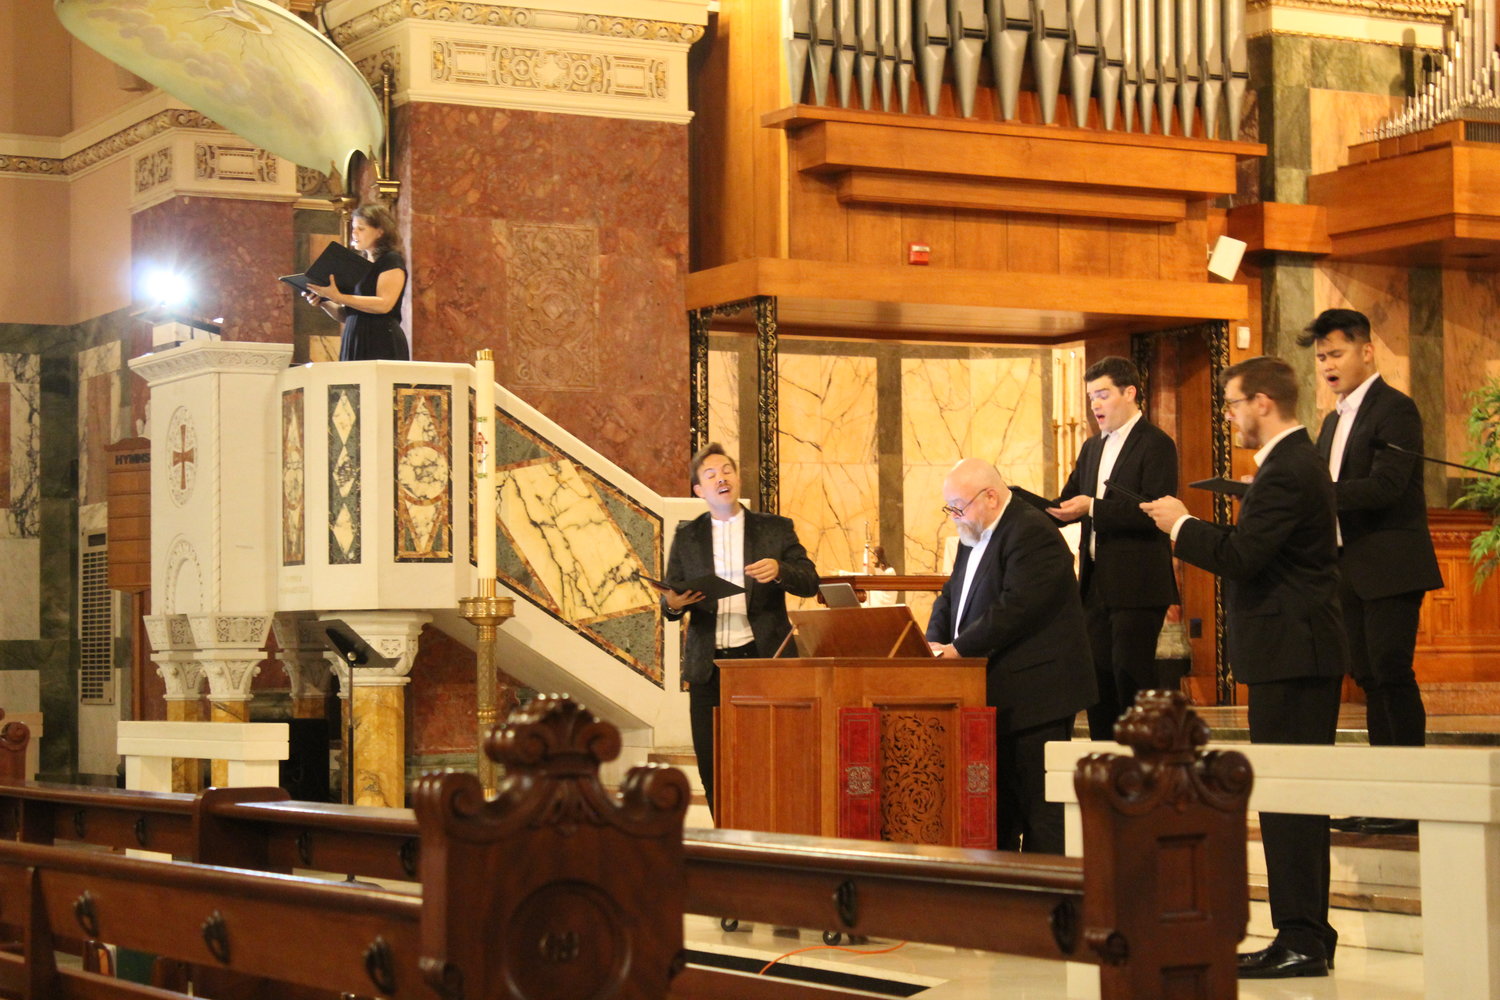 Members of Ensemble Altera perform at Blessed Sacrament Church in Providence. Our Lady of Mount Carmel Music Director Michael Garrepy and Ensemble Altera Director Christopher Lowrey appear third and fifth from the right, respectively; the choir director of the Church of St. Mary’s on Broadway, Rachel Garrepy, sings from the pulpit.